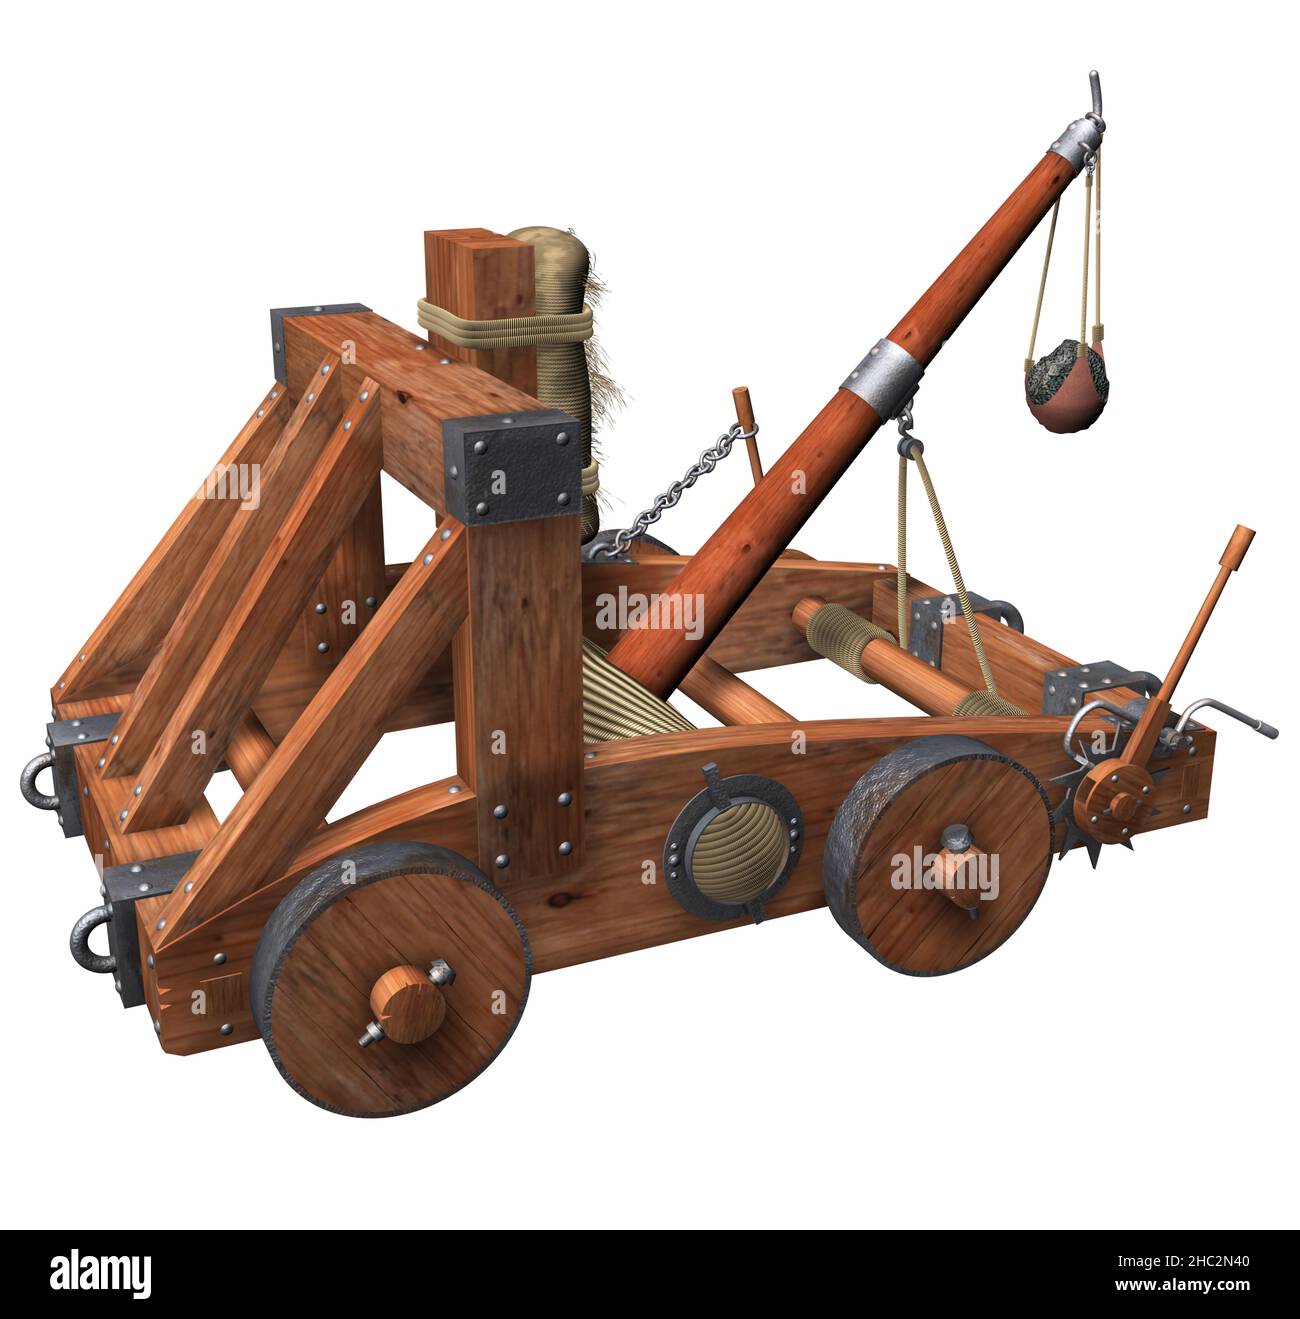 3D Rendering Illustration of an Ancient Roman Onager; a small catapult system. Stock Photo